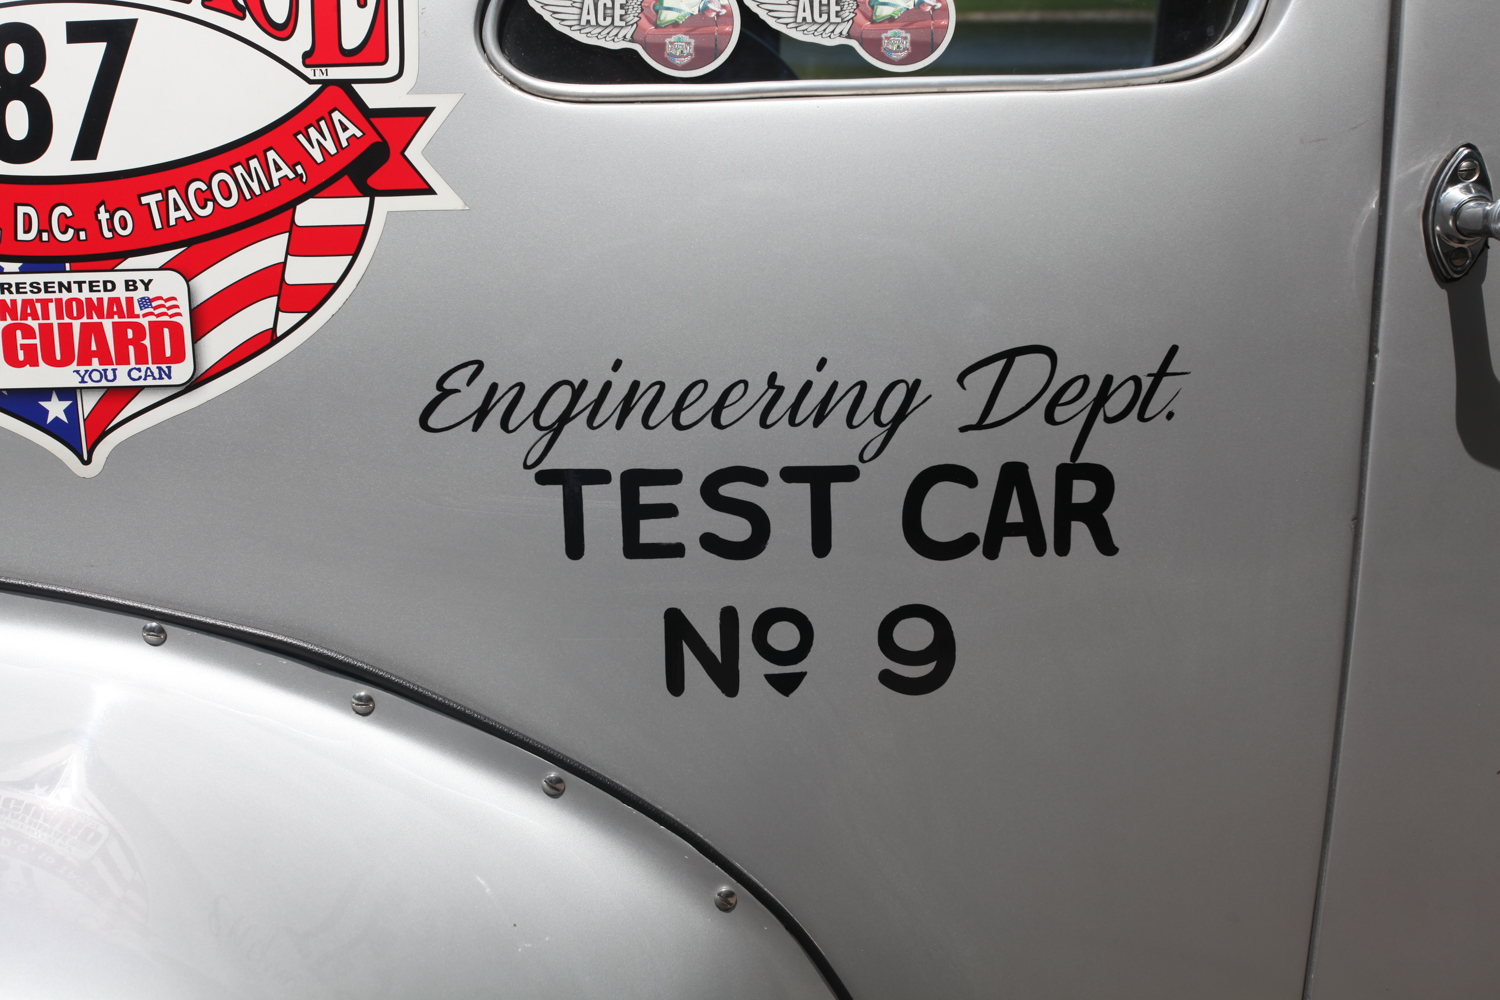 McQuay-Norris had other more standard "test cars," which may explain why this Streamliner is No. 9